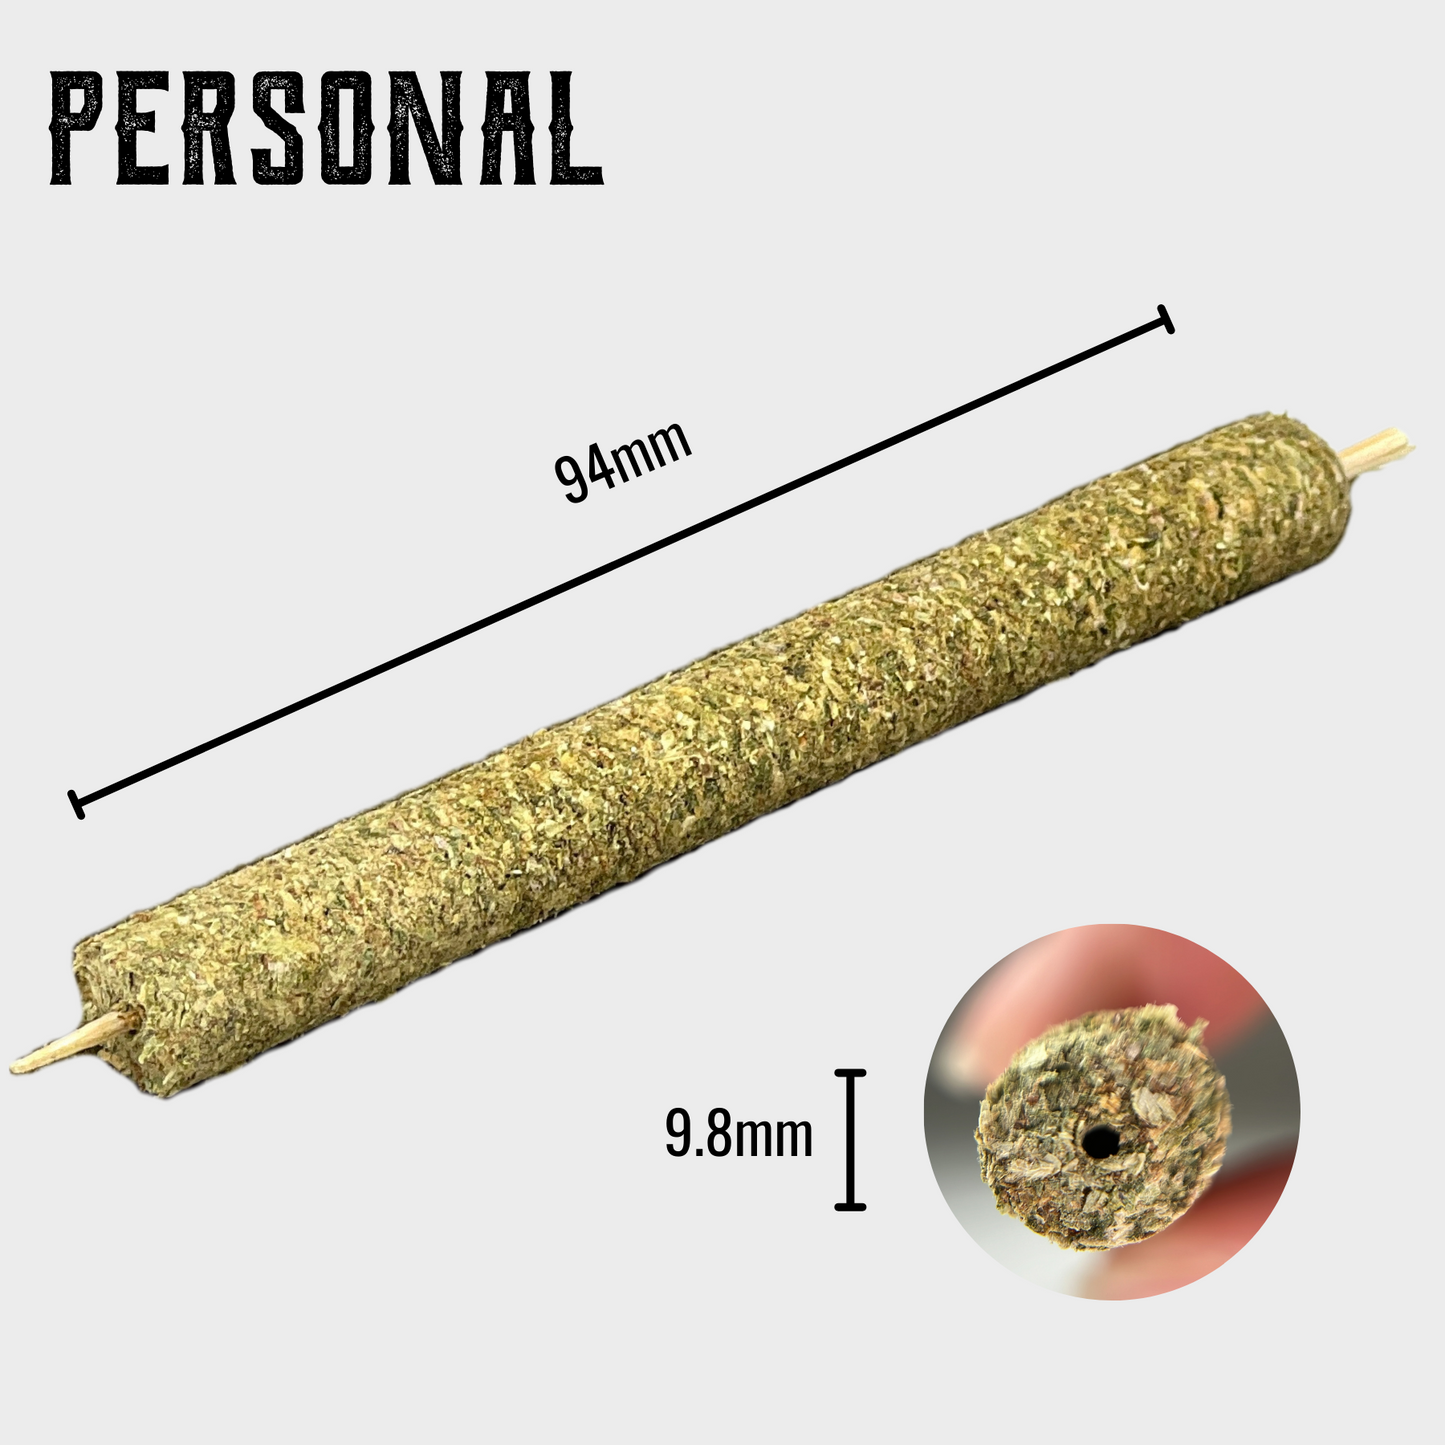 ORIGINAL CANNAMOLD KIT - Choose from 4 Sizes